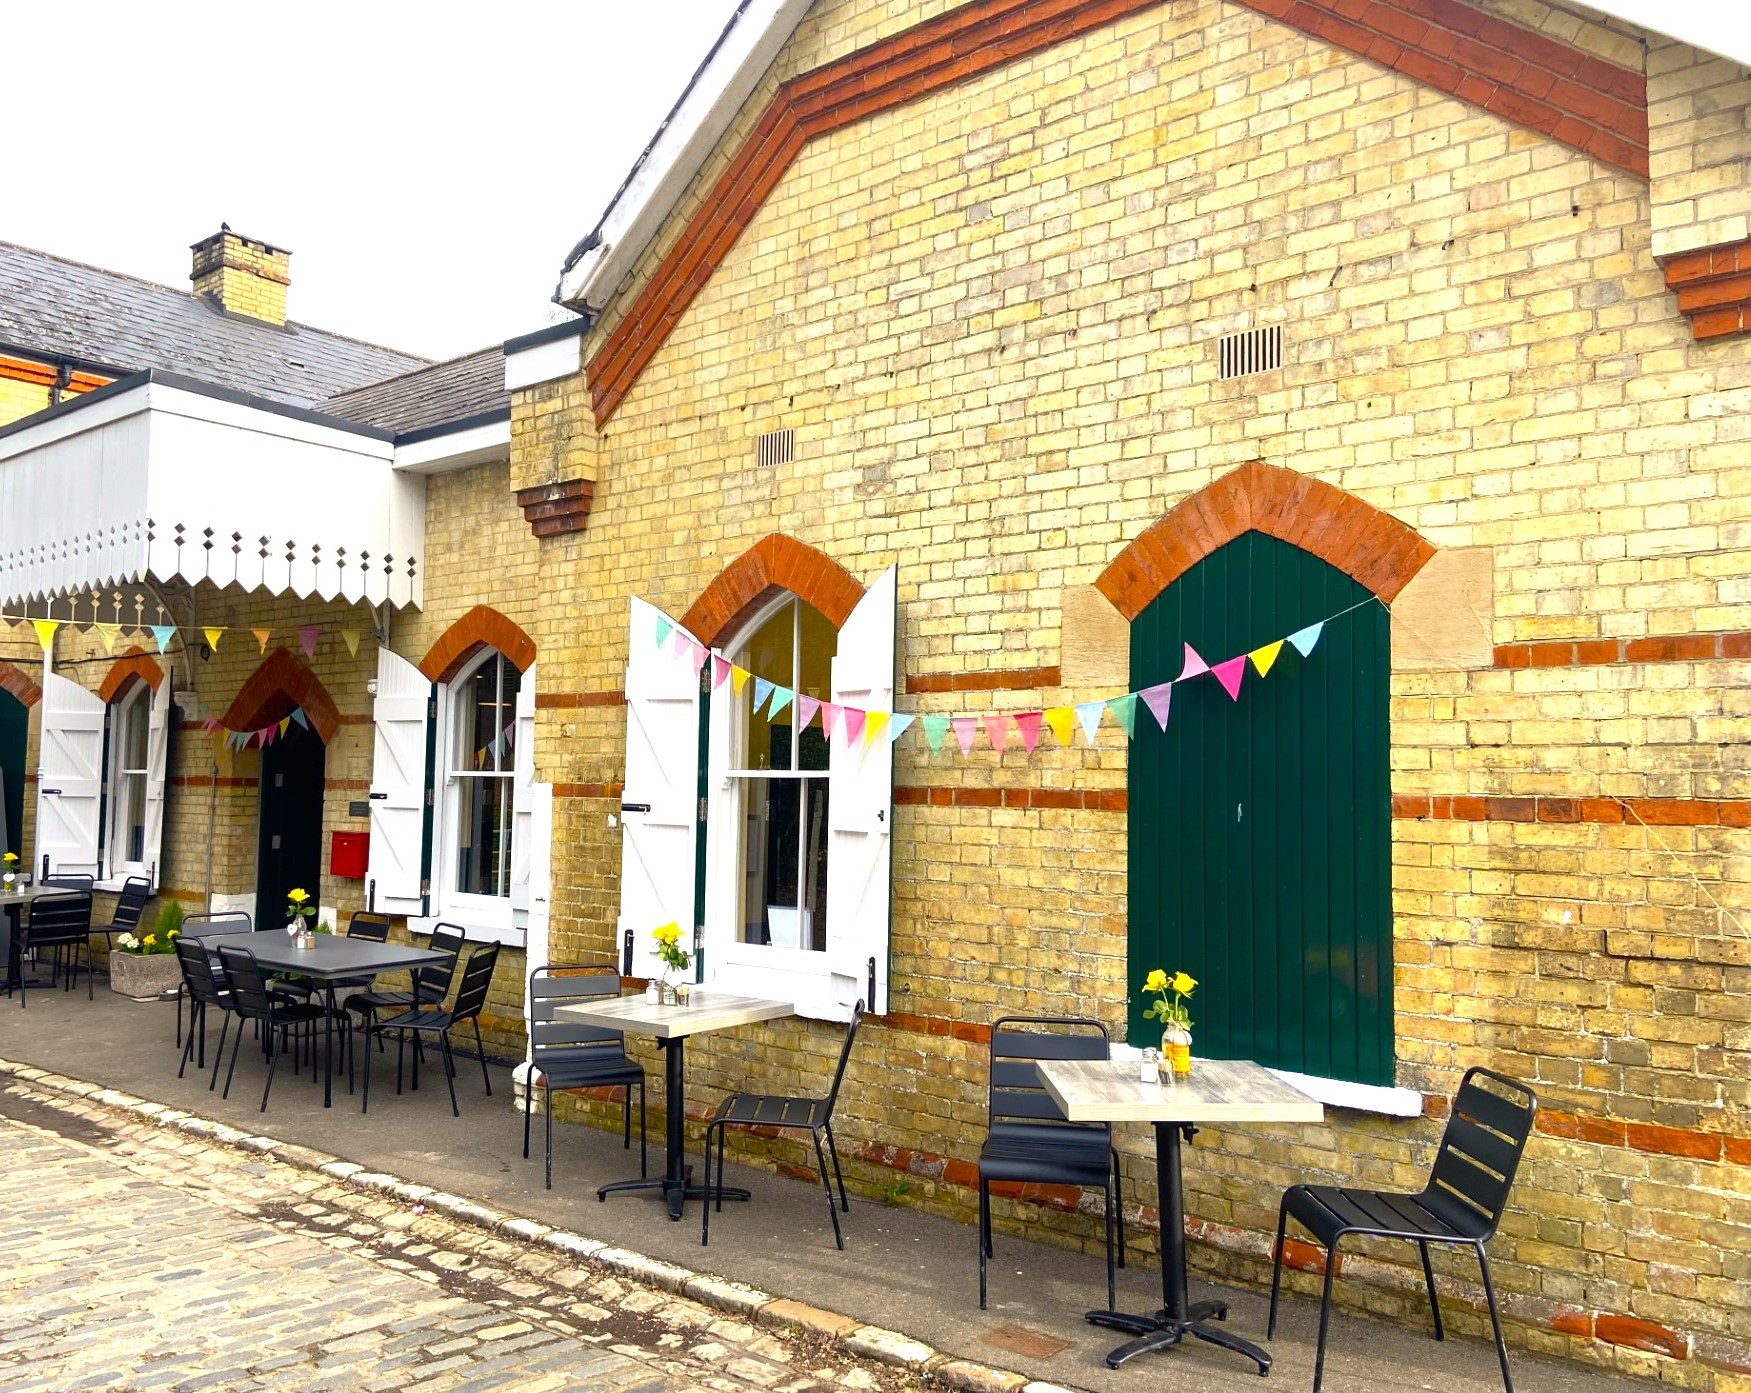 A brick built station building with shuttered windows. The outsides of the closed shutters are green, the insides of the open shutters are white. A white painted wooden canopy extendsabove the green entrance doors. There are tables and chairs outside with vases of yellow daffodils. Colourful bunting is strung between the windows and under the canopy.